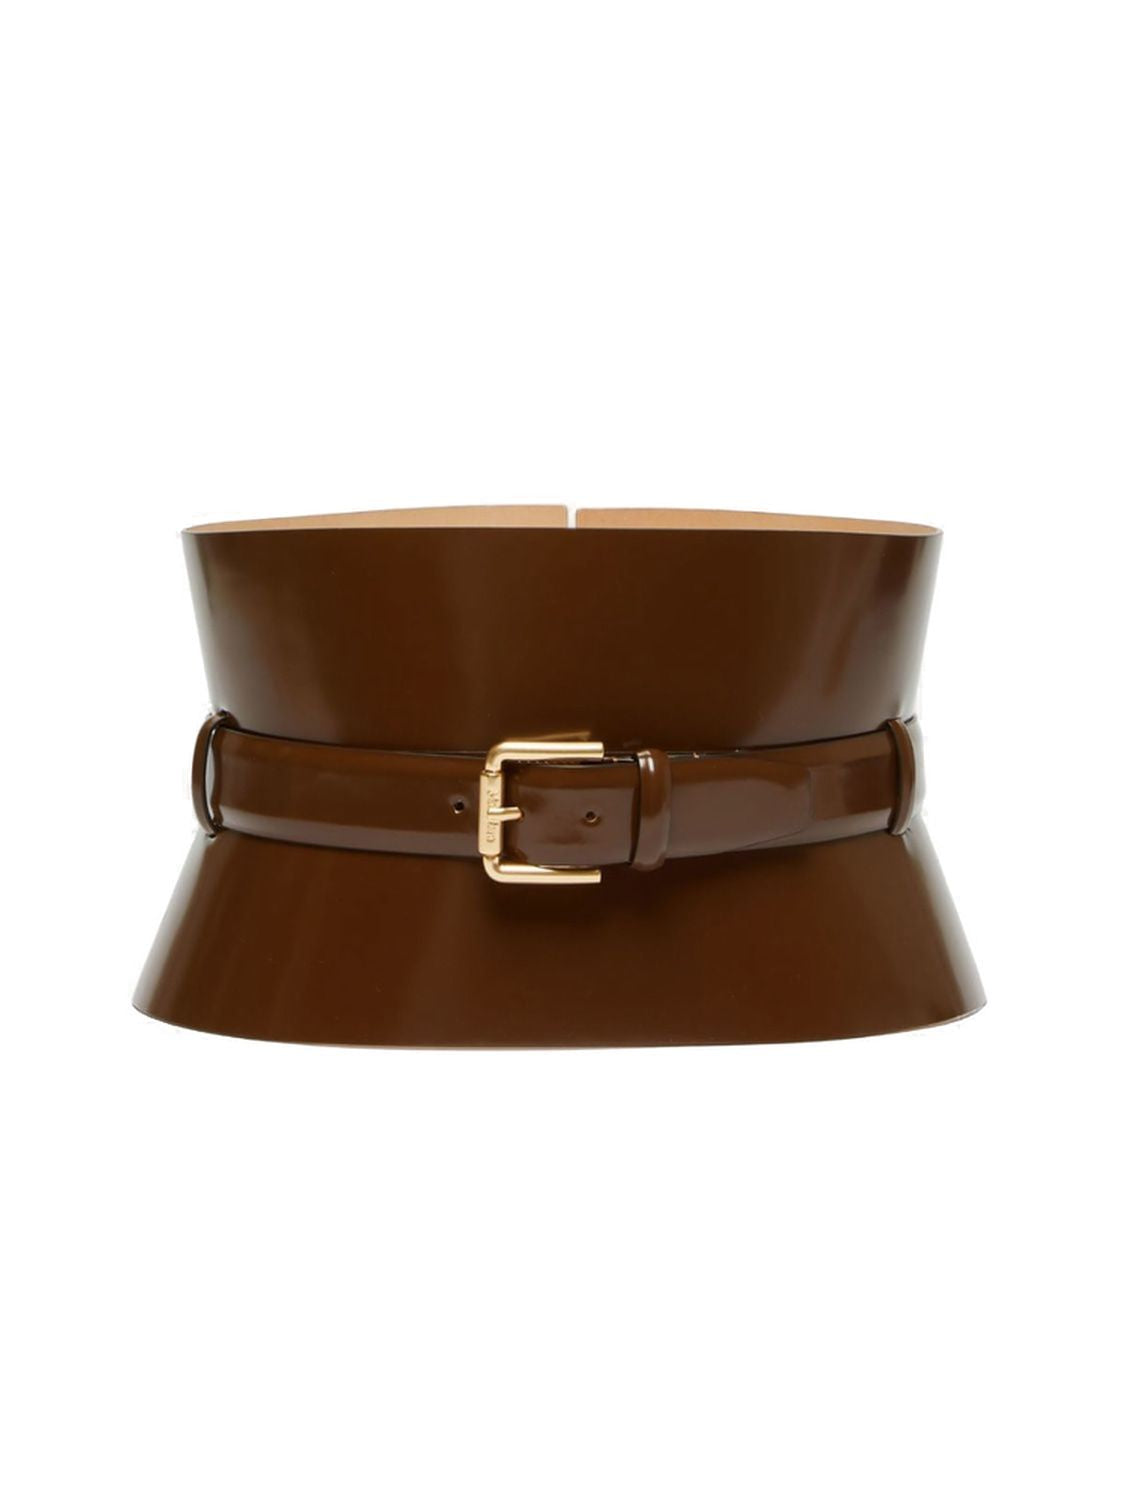 MAX MARA Brown Leather Belt with Suspenders for Women